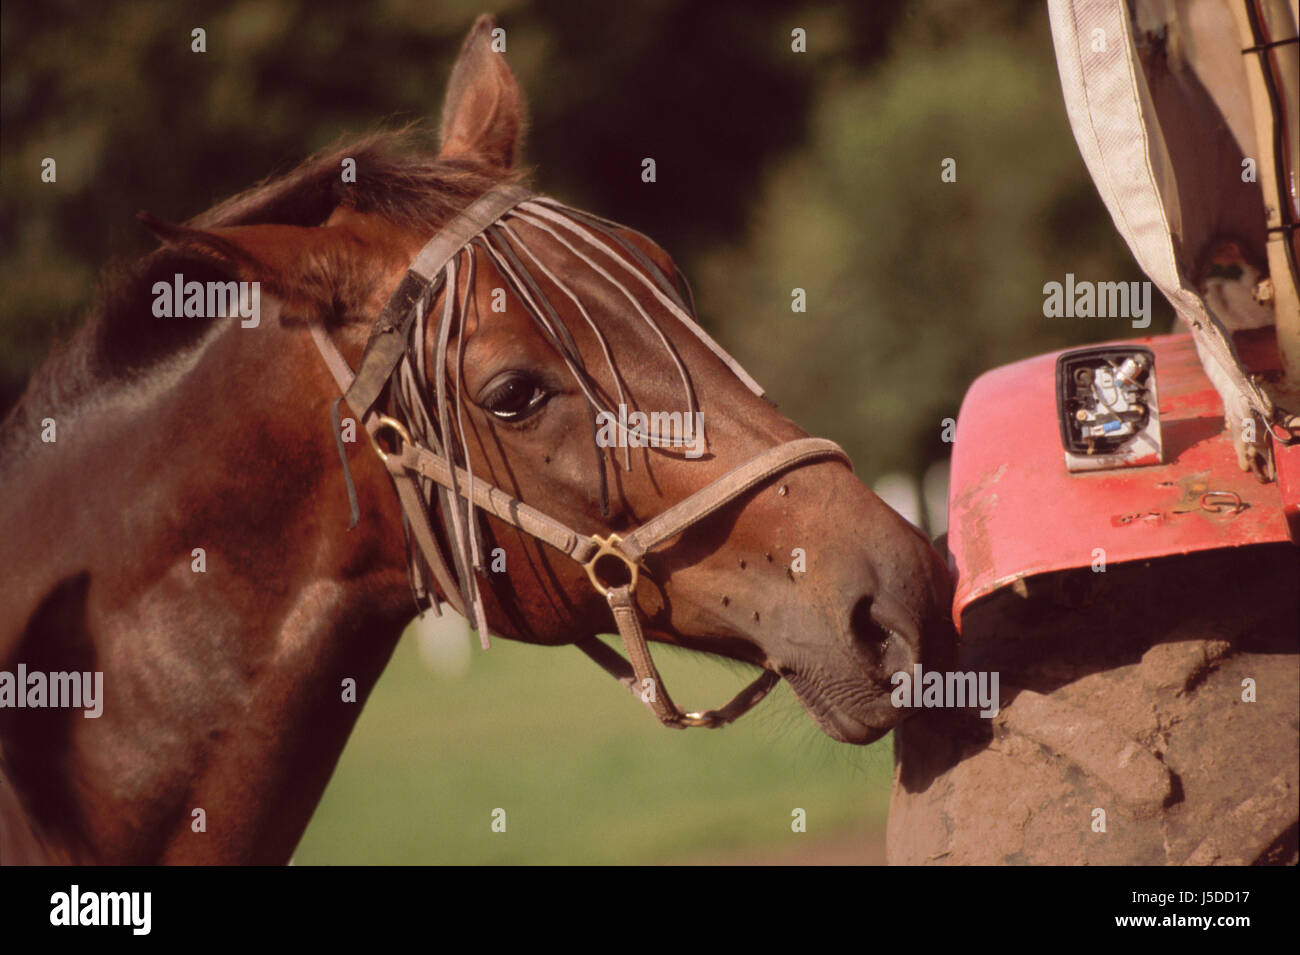 horse engineering halter tractor mudguard refusal browner ripen red coarse old Stock Photo